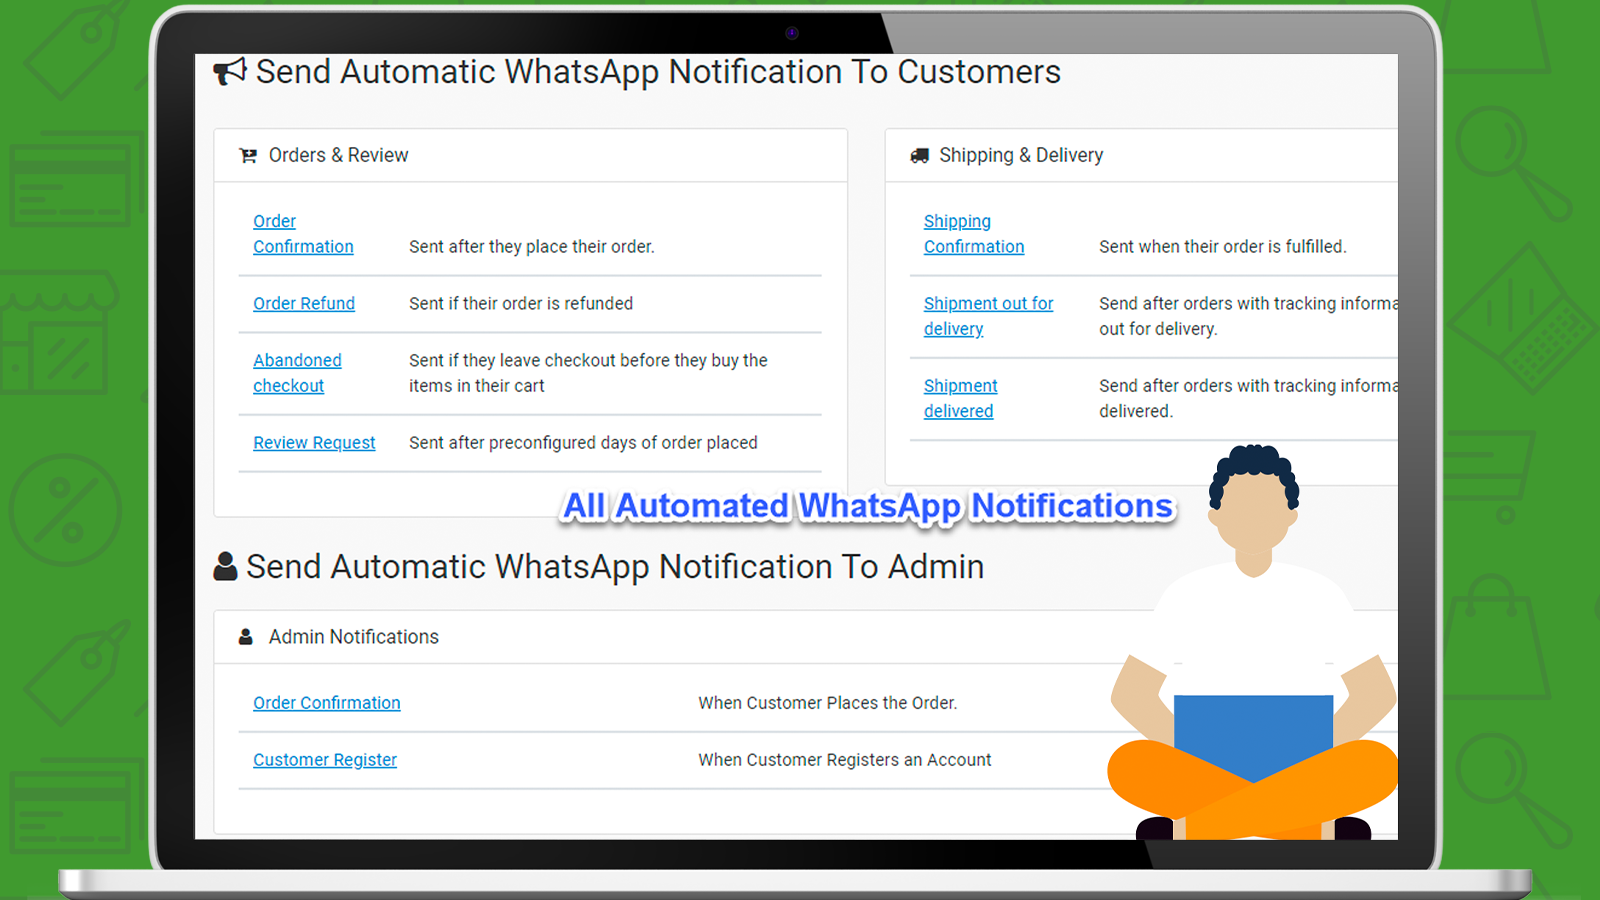 All Available Automated WhatsApp and SMS Notifications